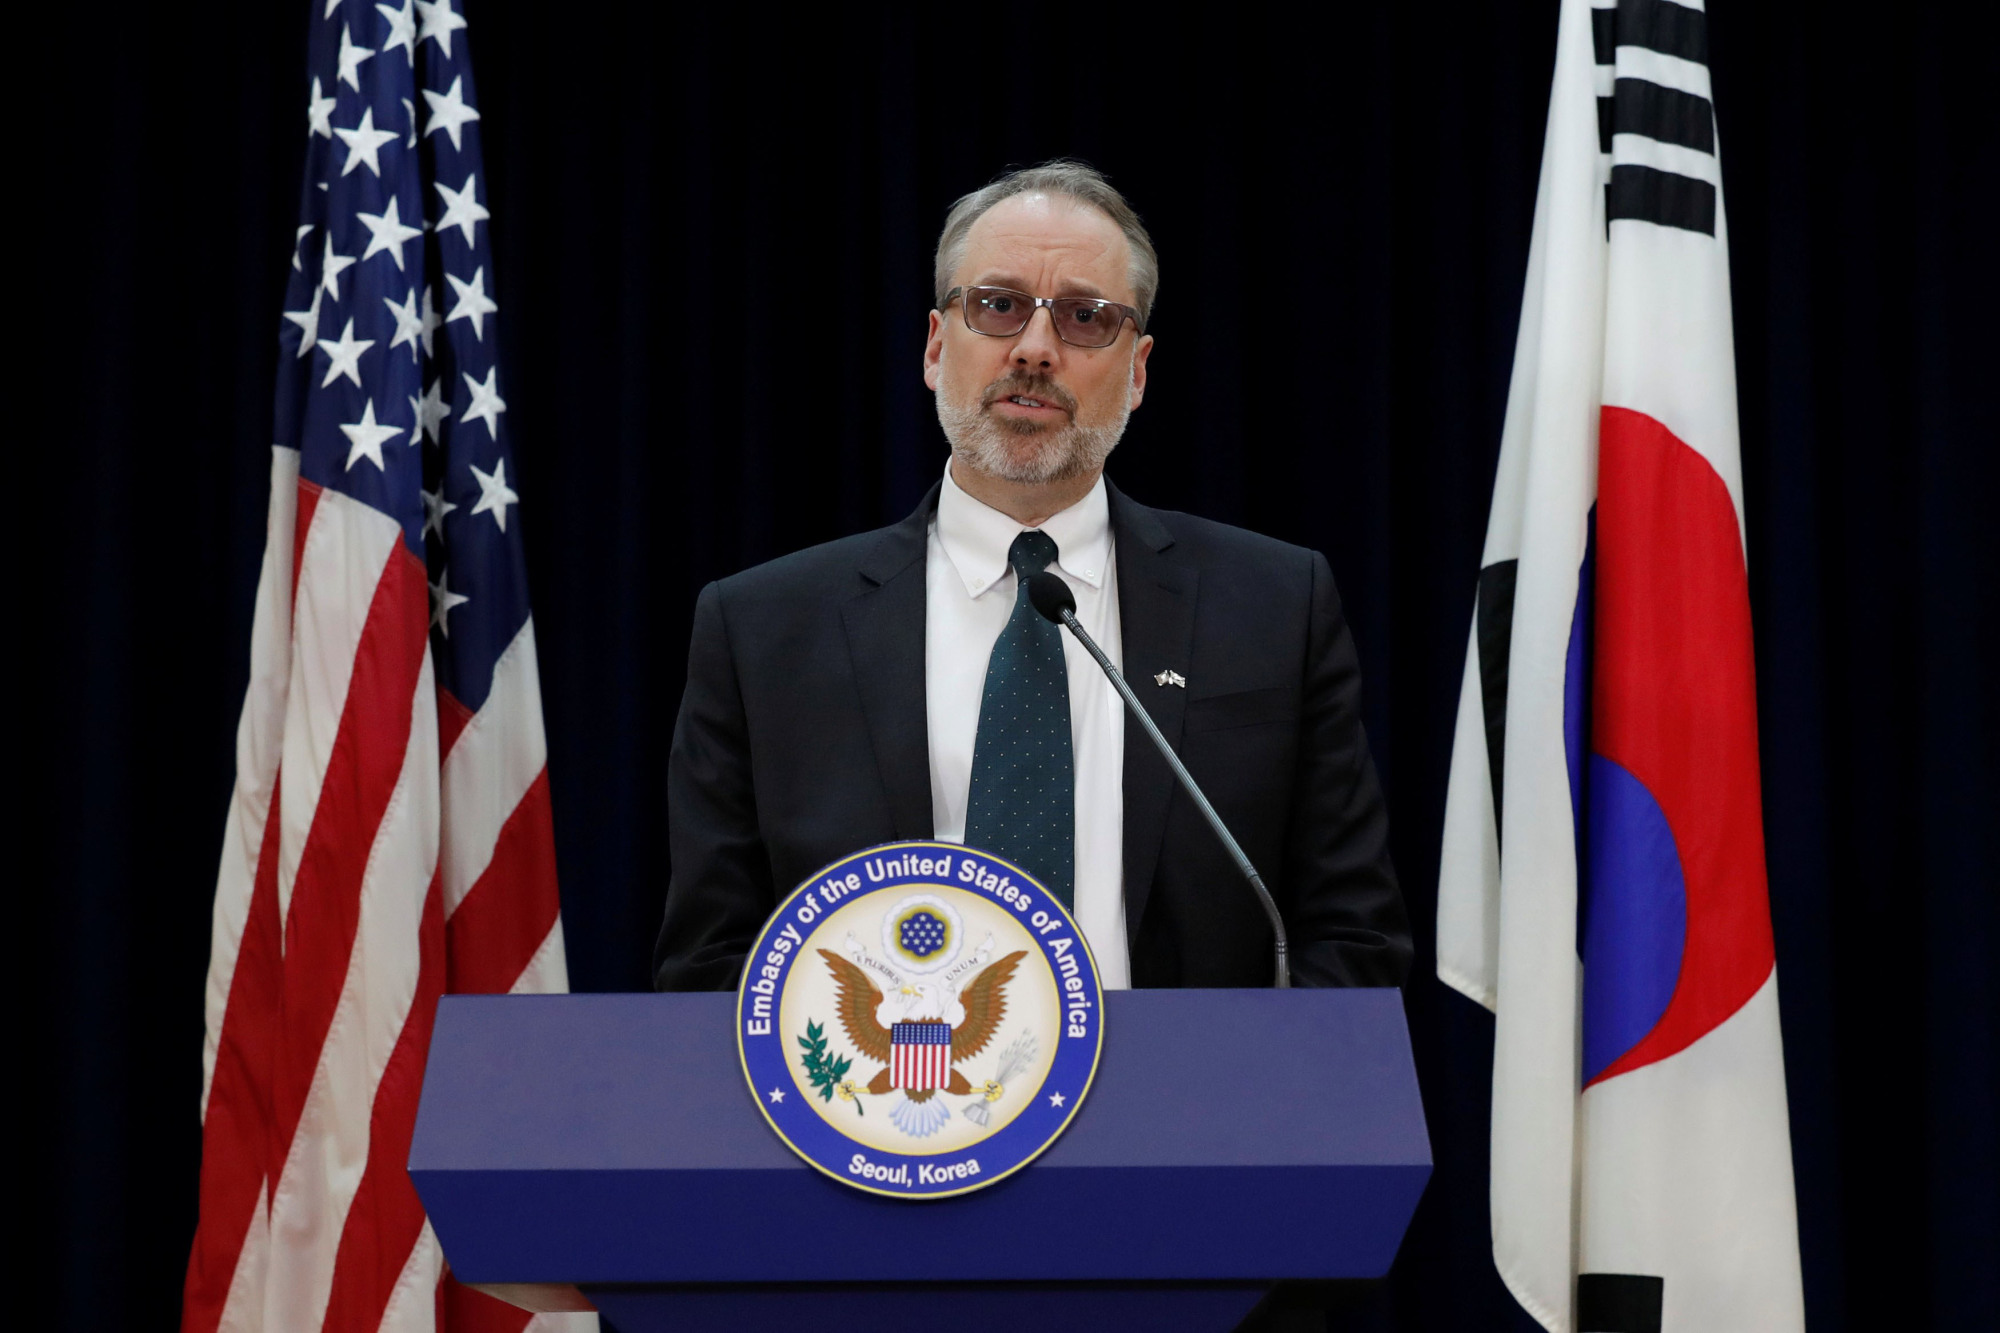 James DeHart, the top U.S. negotiator in talks with South Korea on a new cost-sharing agreement for hosting the U.S. military, speaks at the American Embassy in Seoul on Tuesday after meeting with his South Korean counterpart. | REUTERS